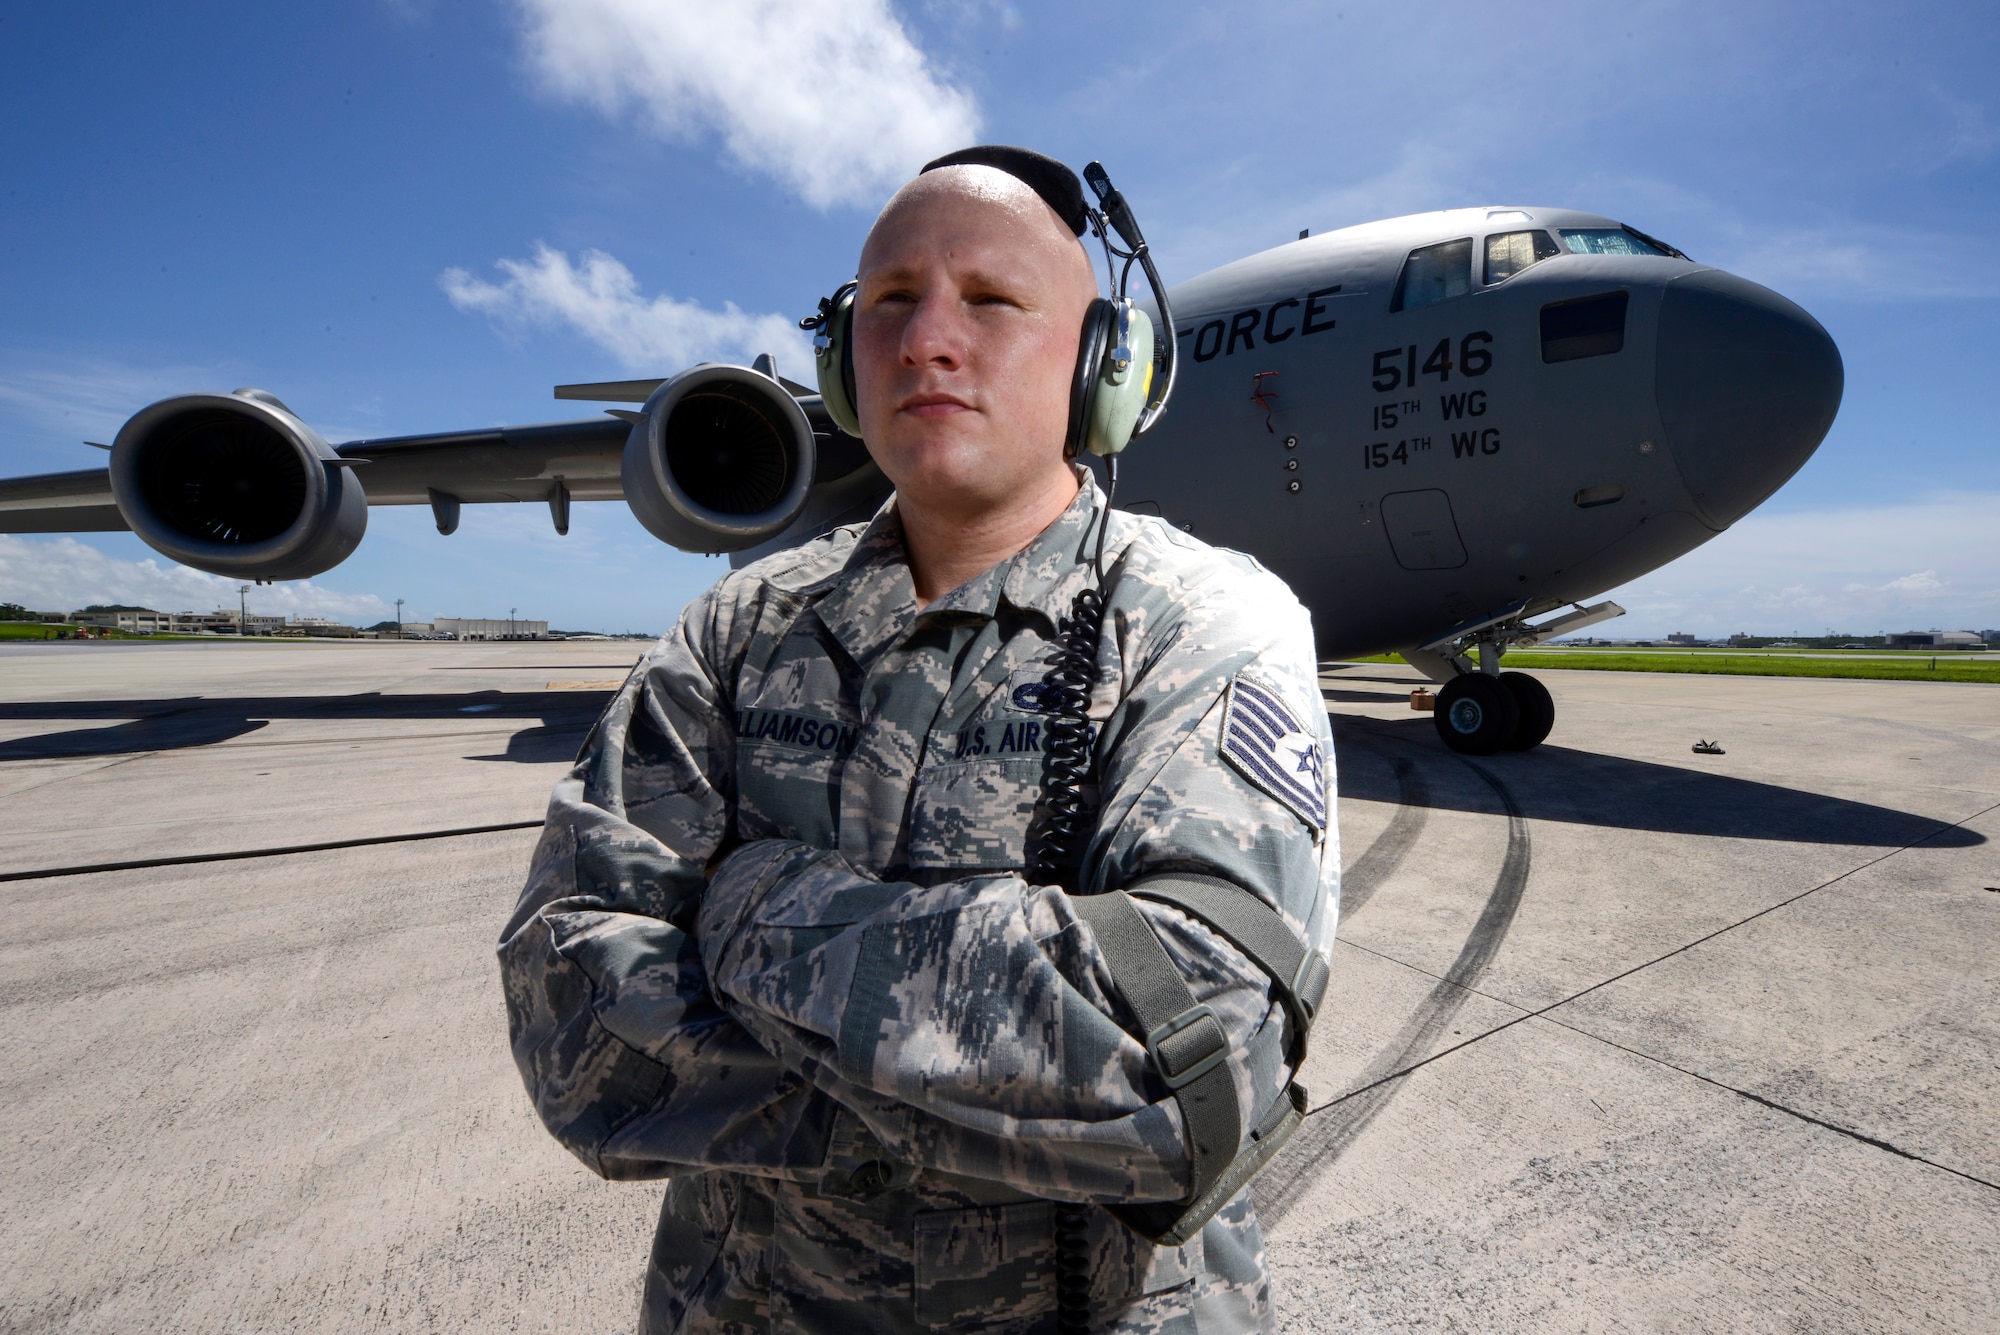 U.S. Air Force Tech. Sgt. David Williamson, 733rd Air Mobility Squadon, stands next to a 36th Airlift Squadron C-17 Globemaster III cargo aircraft on the Kadena Air Base, Japan, flightline June 9, 2015. In addition to the hard work he puts into his Air Force career, Williamson also strives to improve his rap career outside the uniform. (U.S. Air Force photo by Staff Sgt. Maeson L. Elleman)